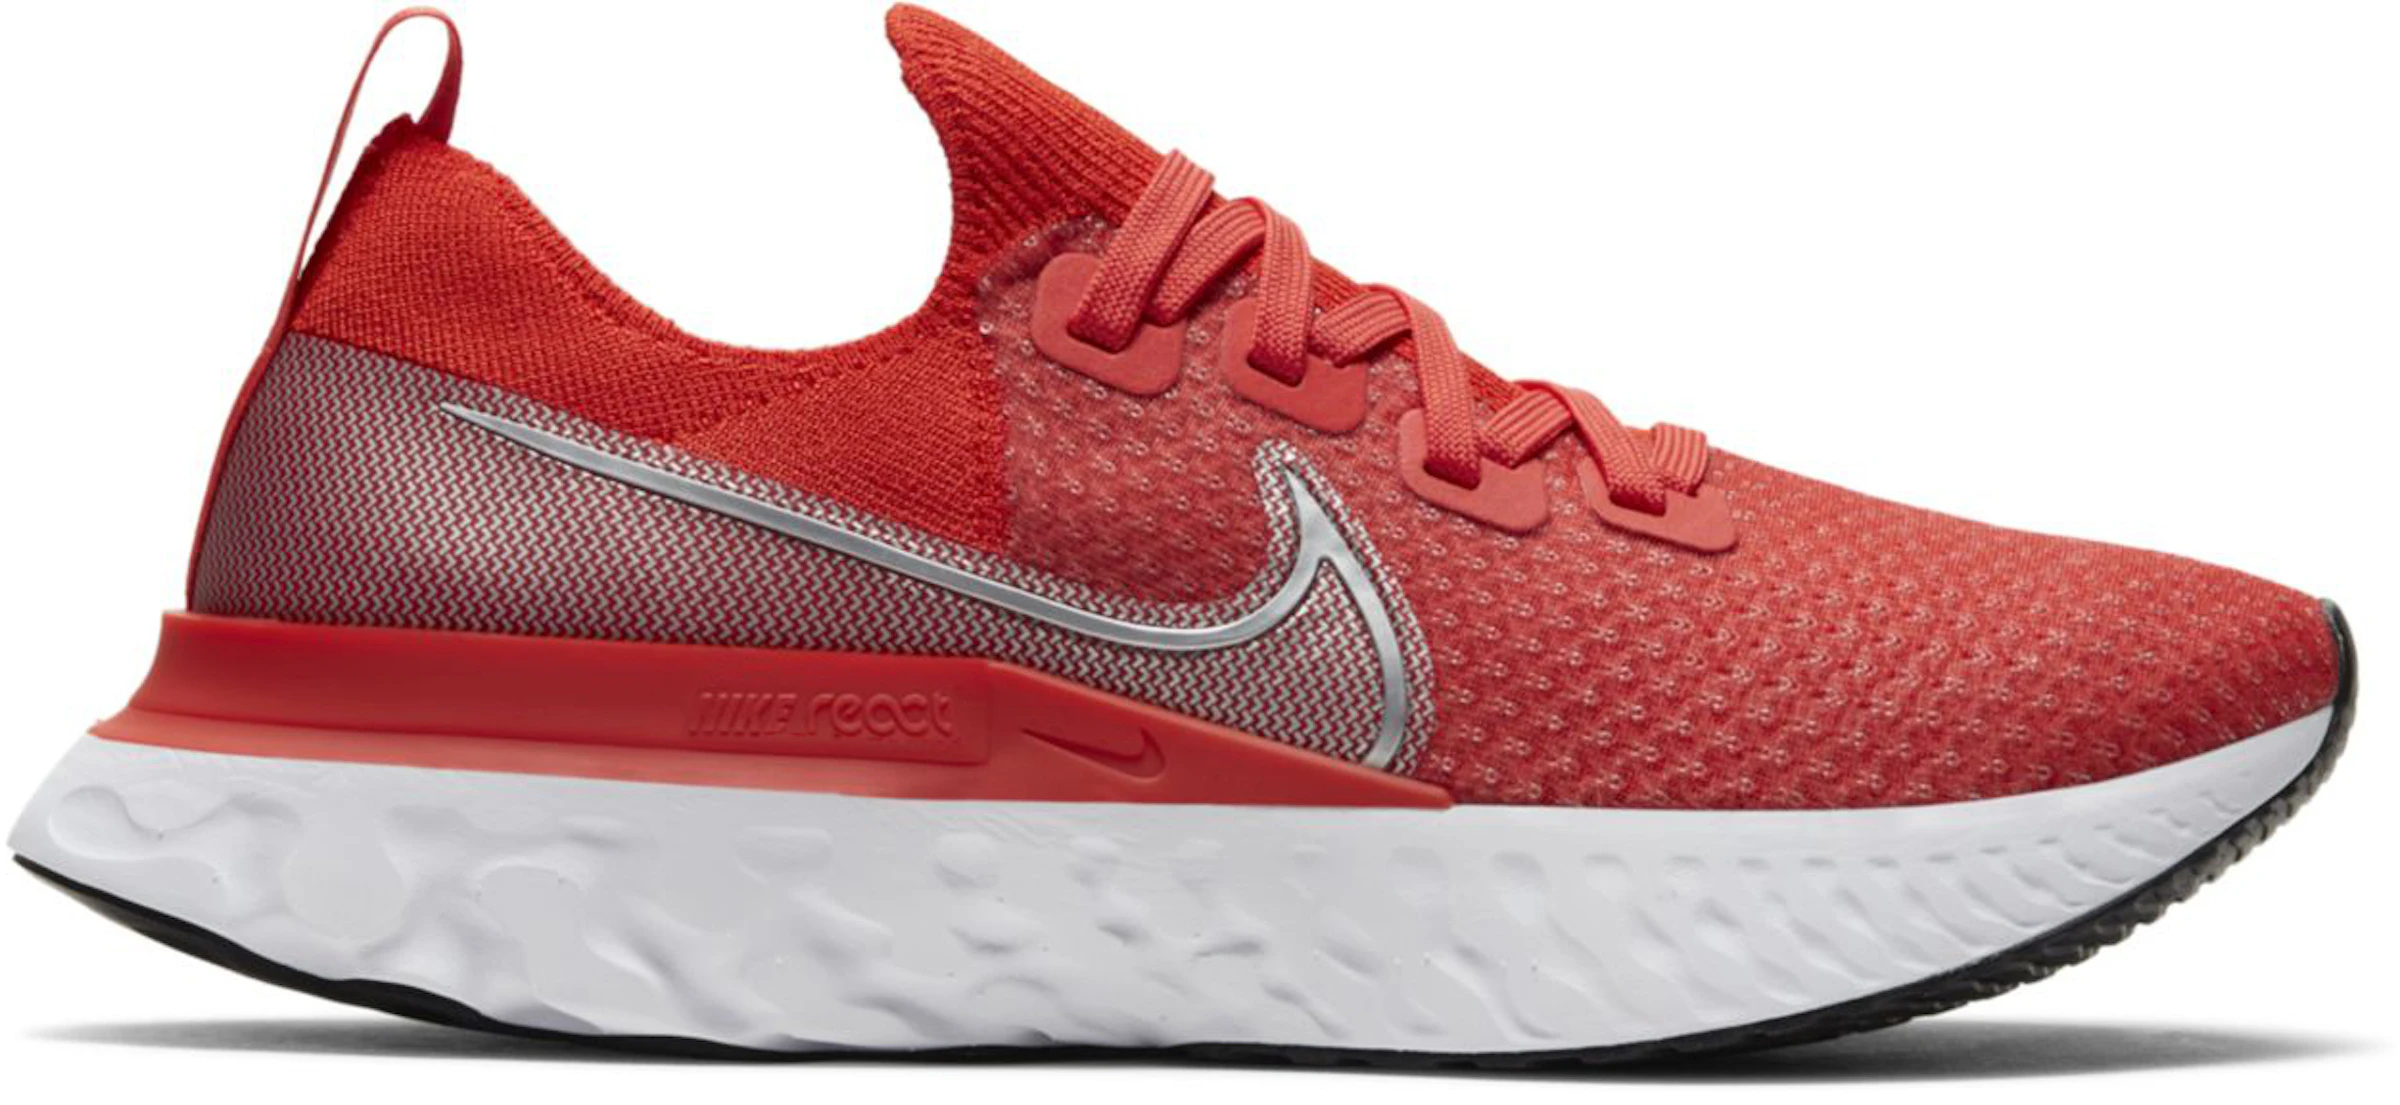 Nike React Infinity Run Flyknit Chile Red - DC2054-600 ES